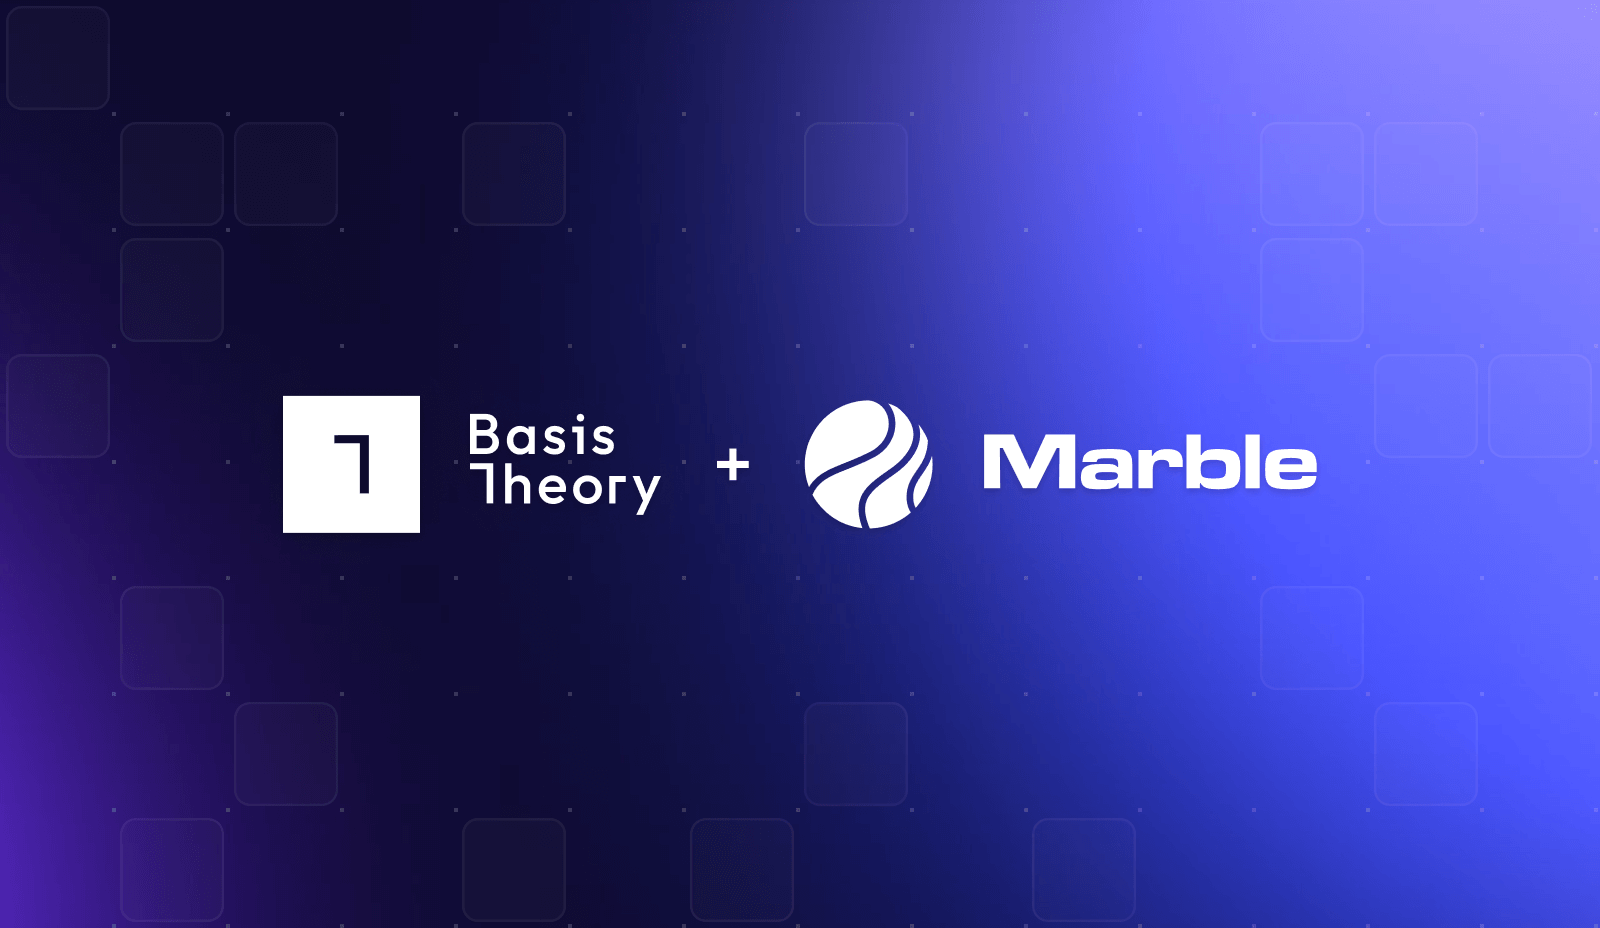 Case study explaining how Marble worked with Basis Theory to get PCI Compliant